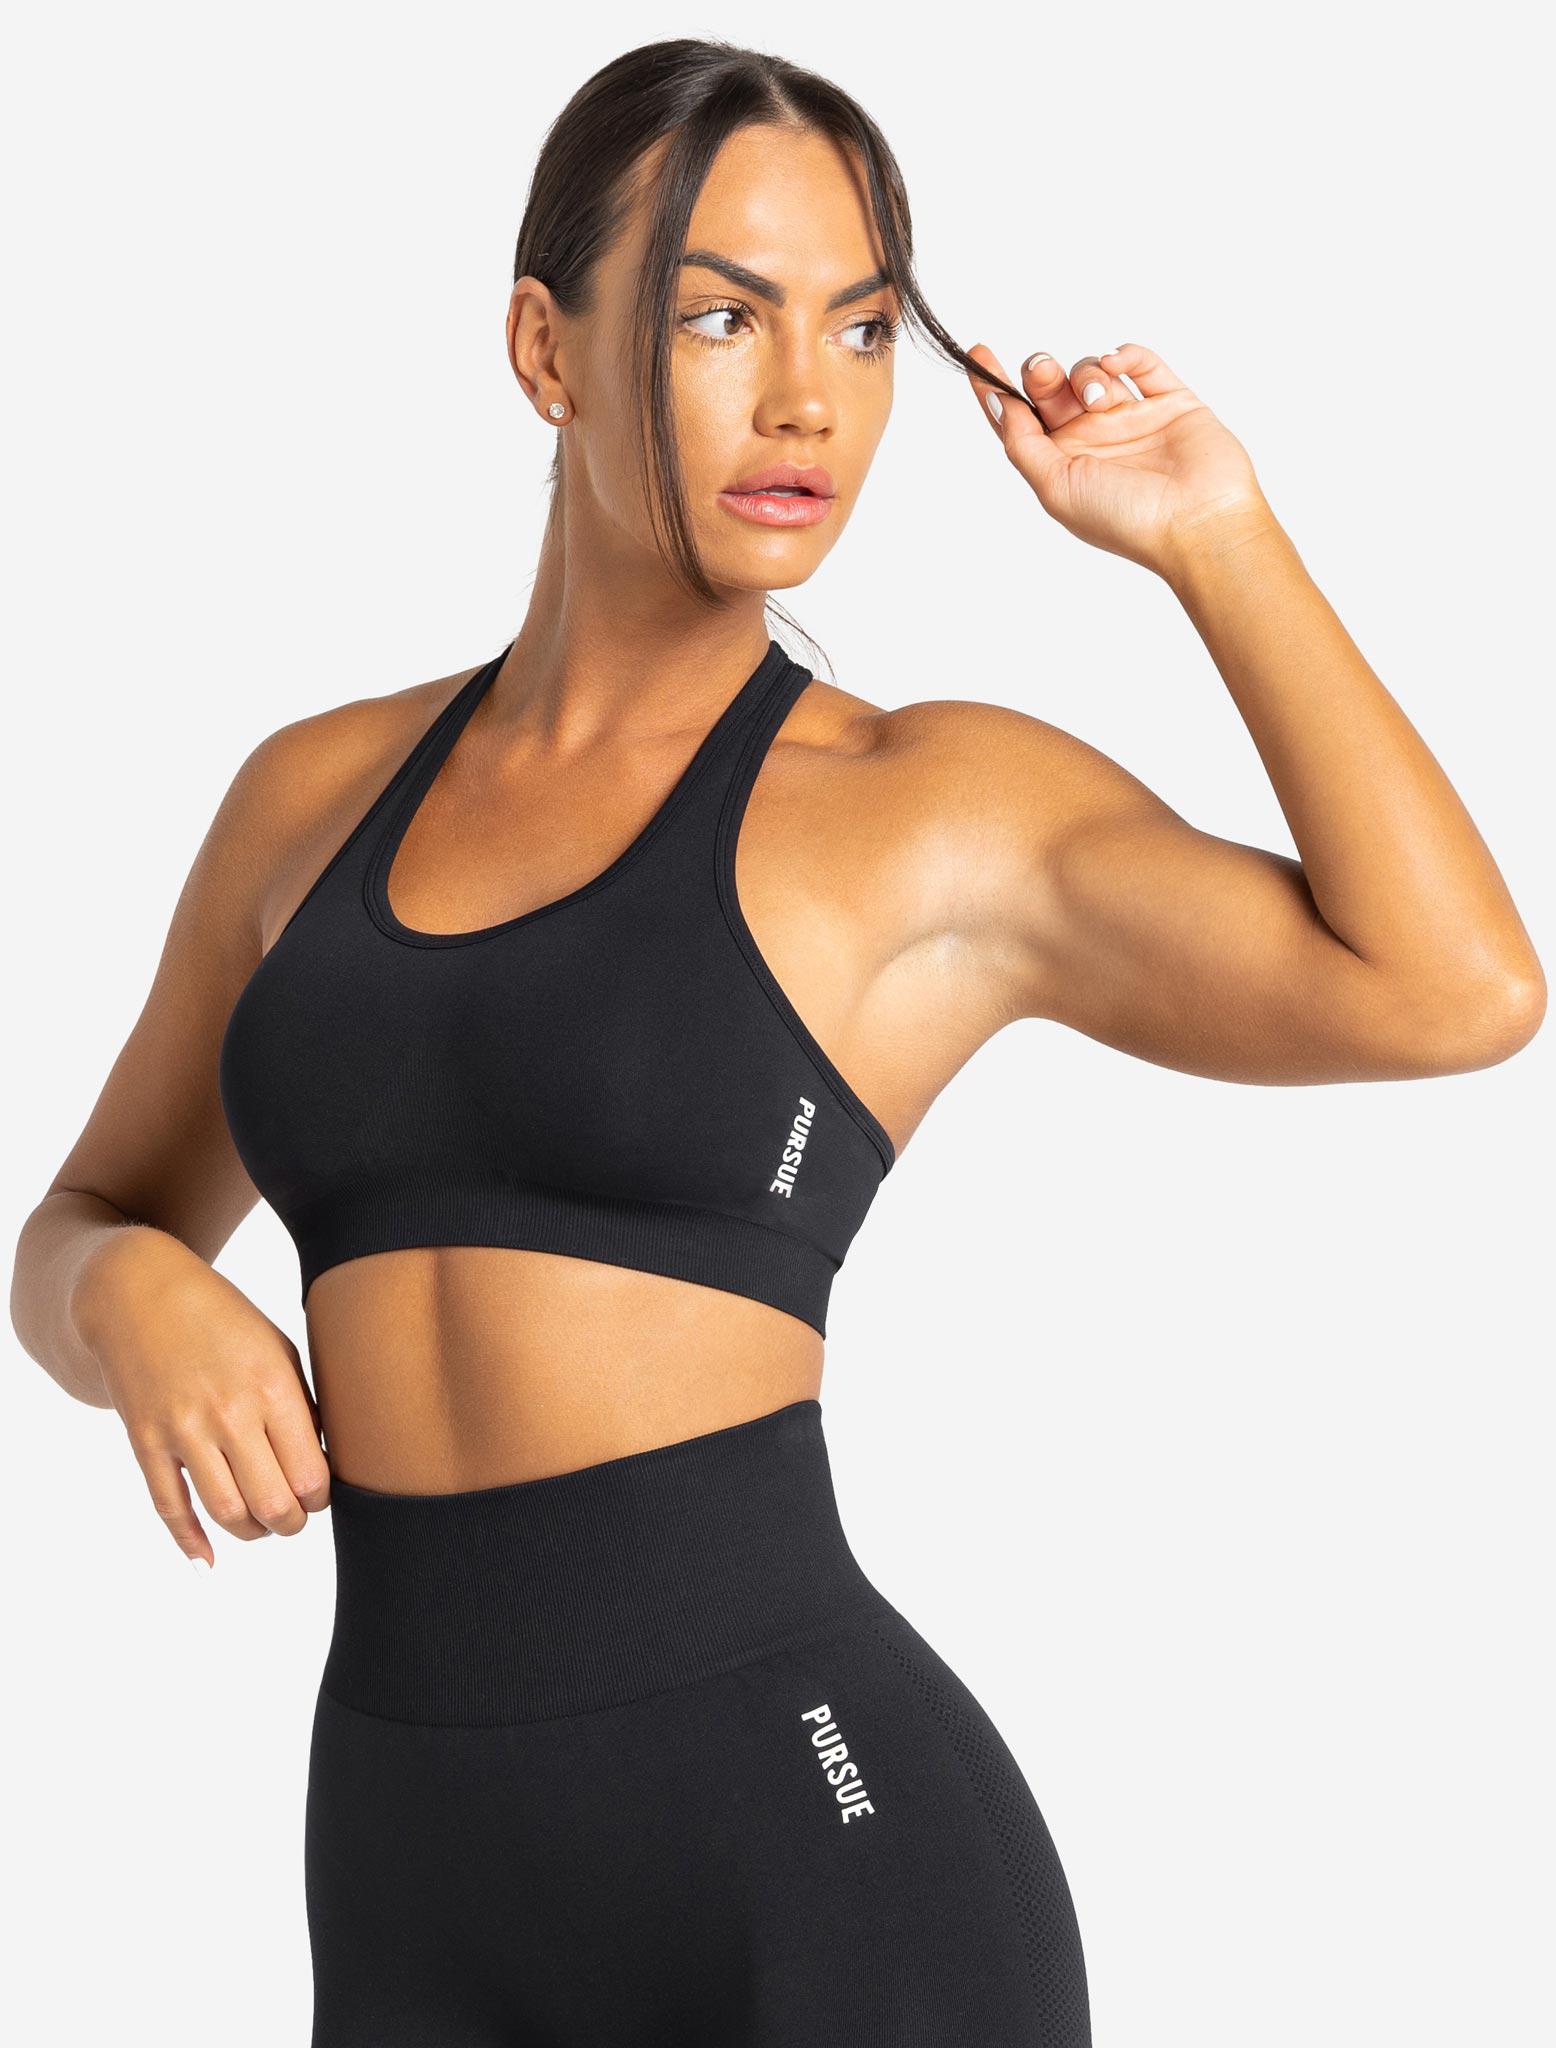 Muscle Torque Running/Workout High Impact Adjustable Sports Bra - Solid  Black